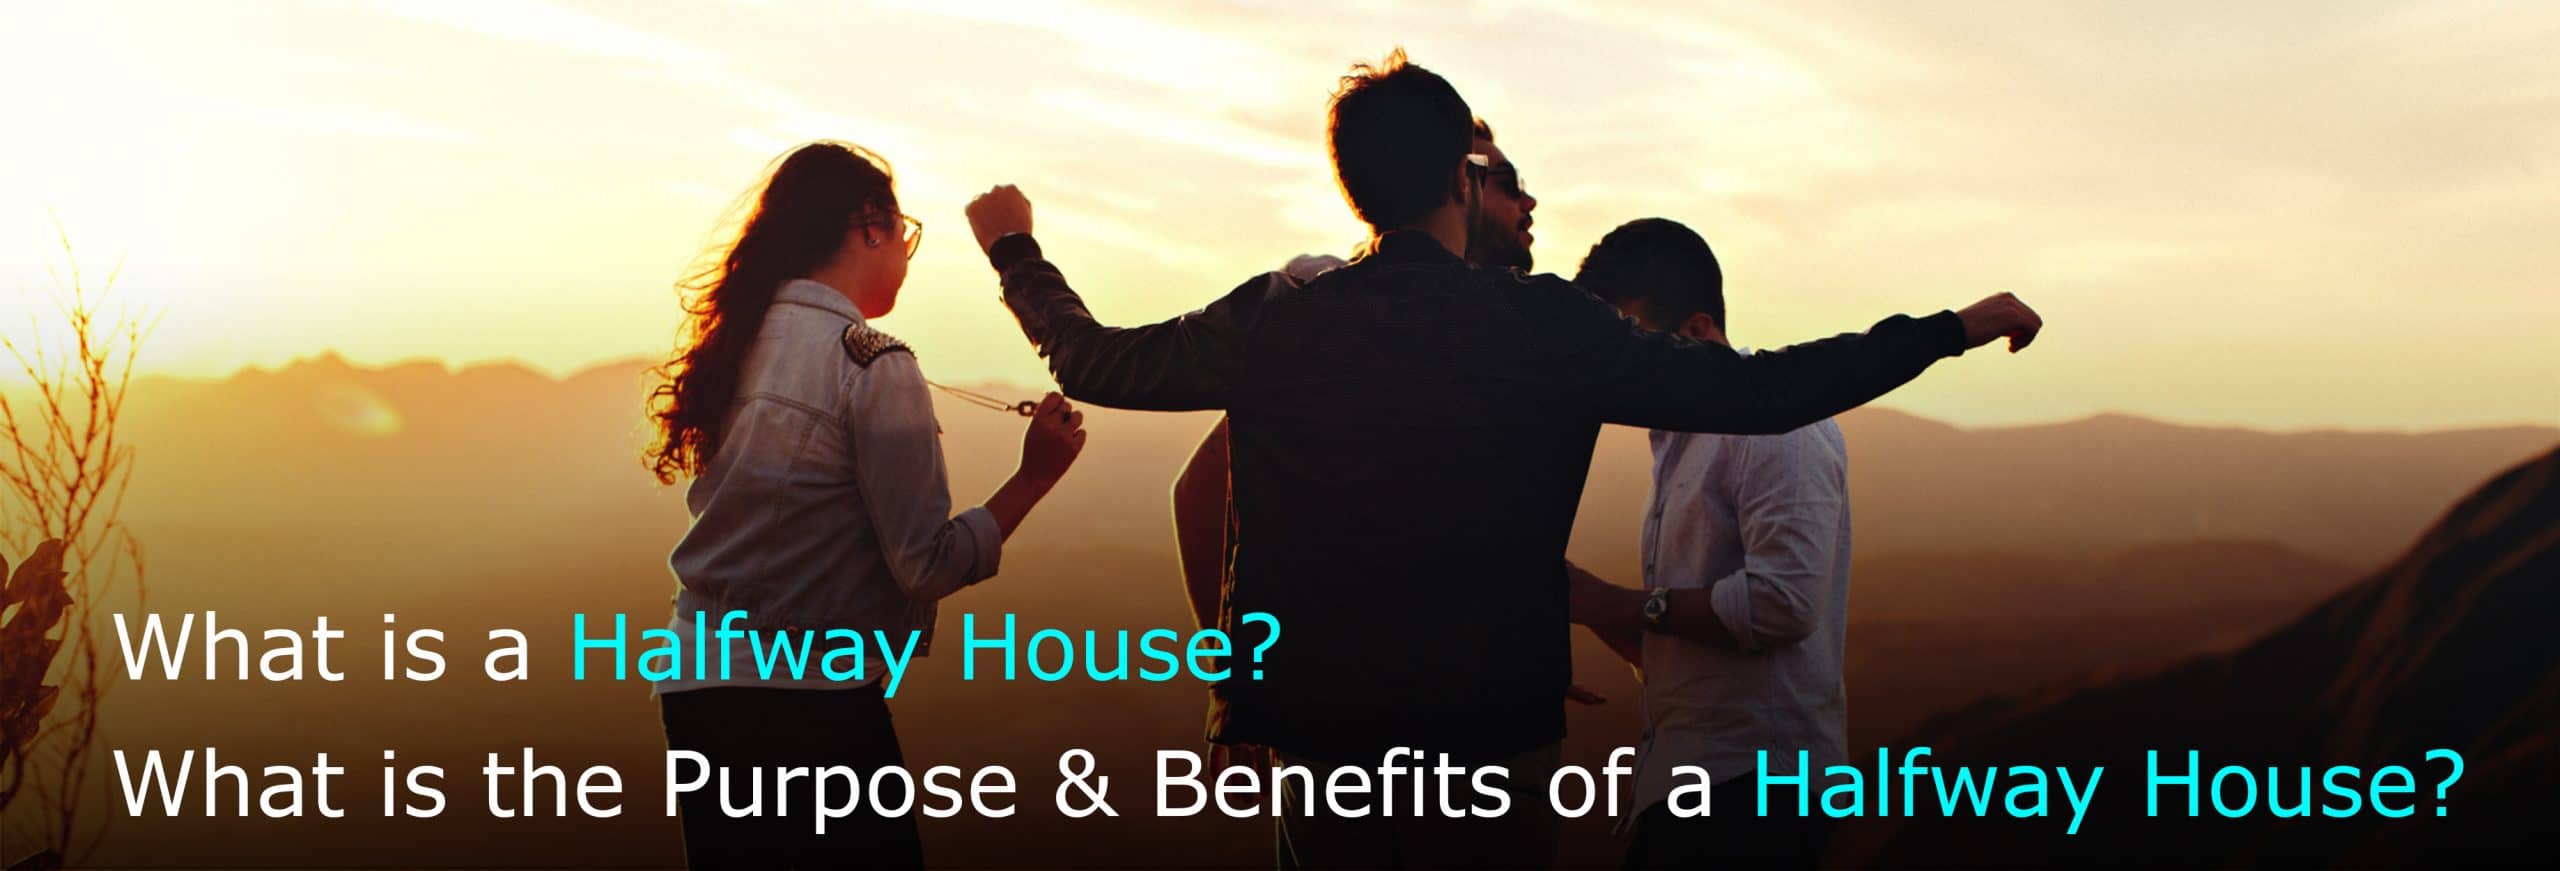 What Is A Halfway House? What Is The Purpose & Benefits Of A Halfway House?